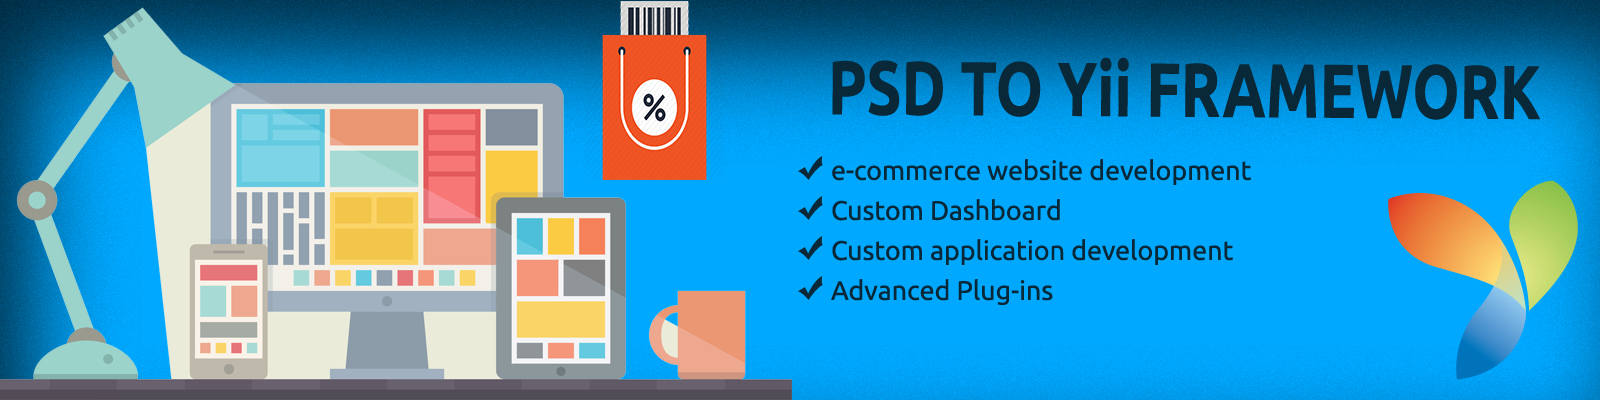 psd to yii conversion services